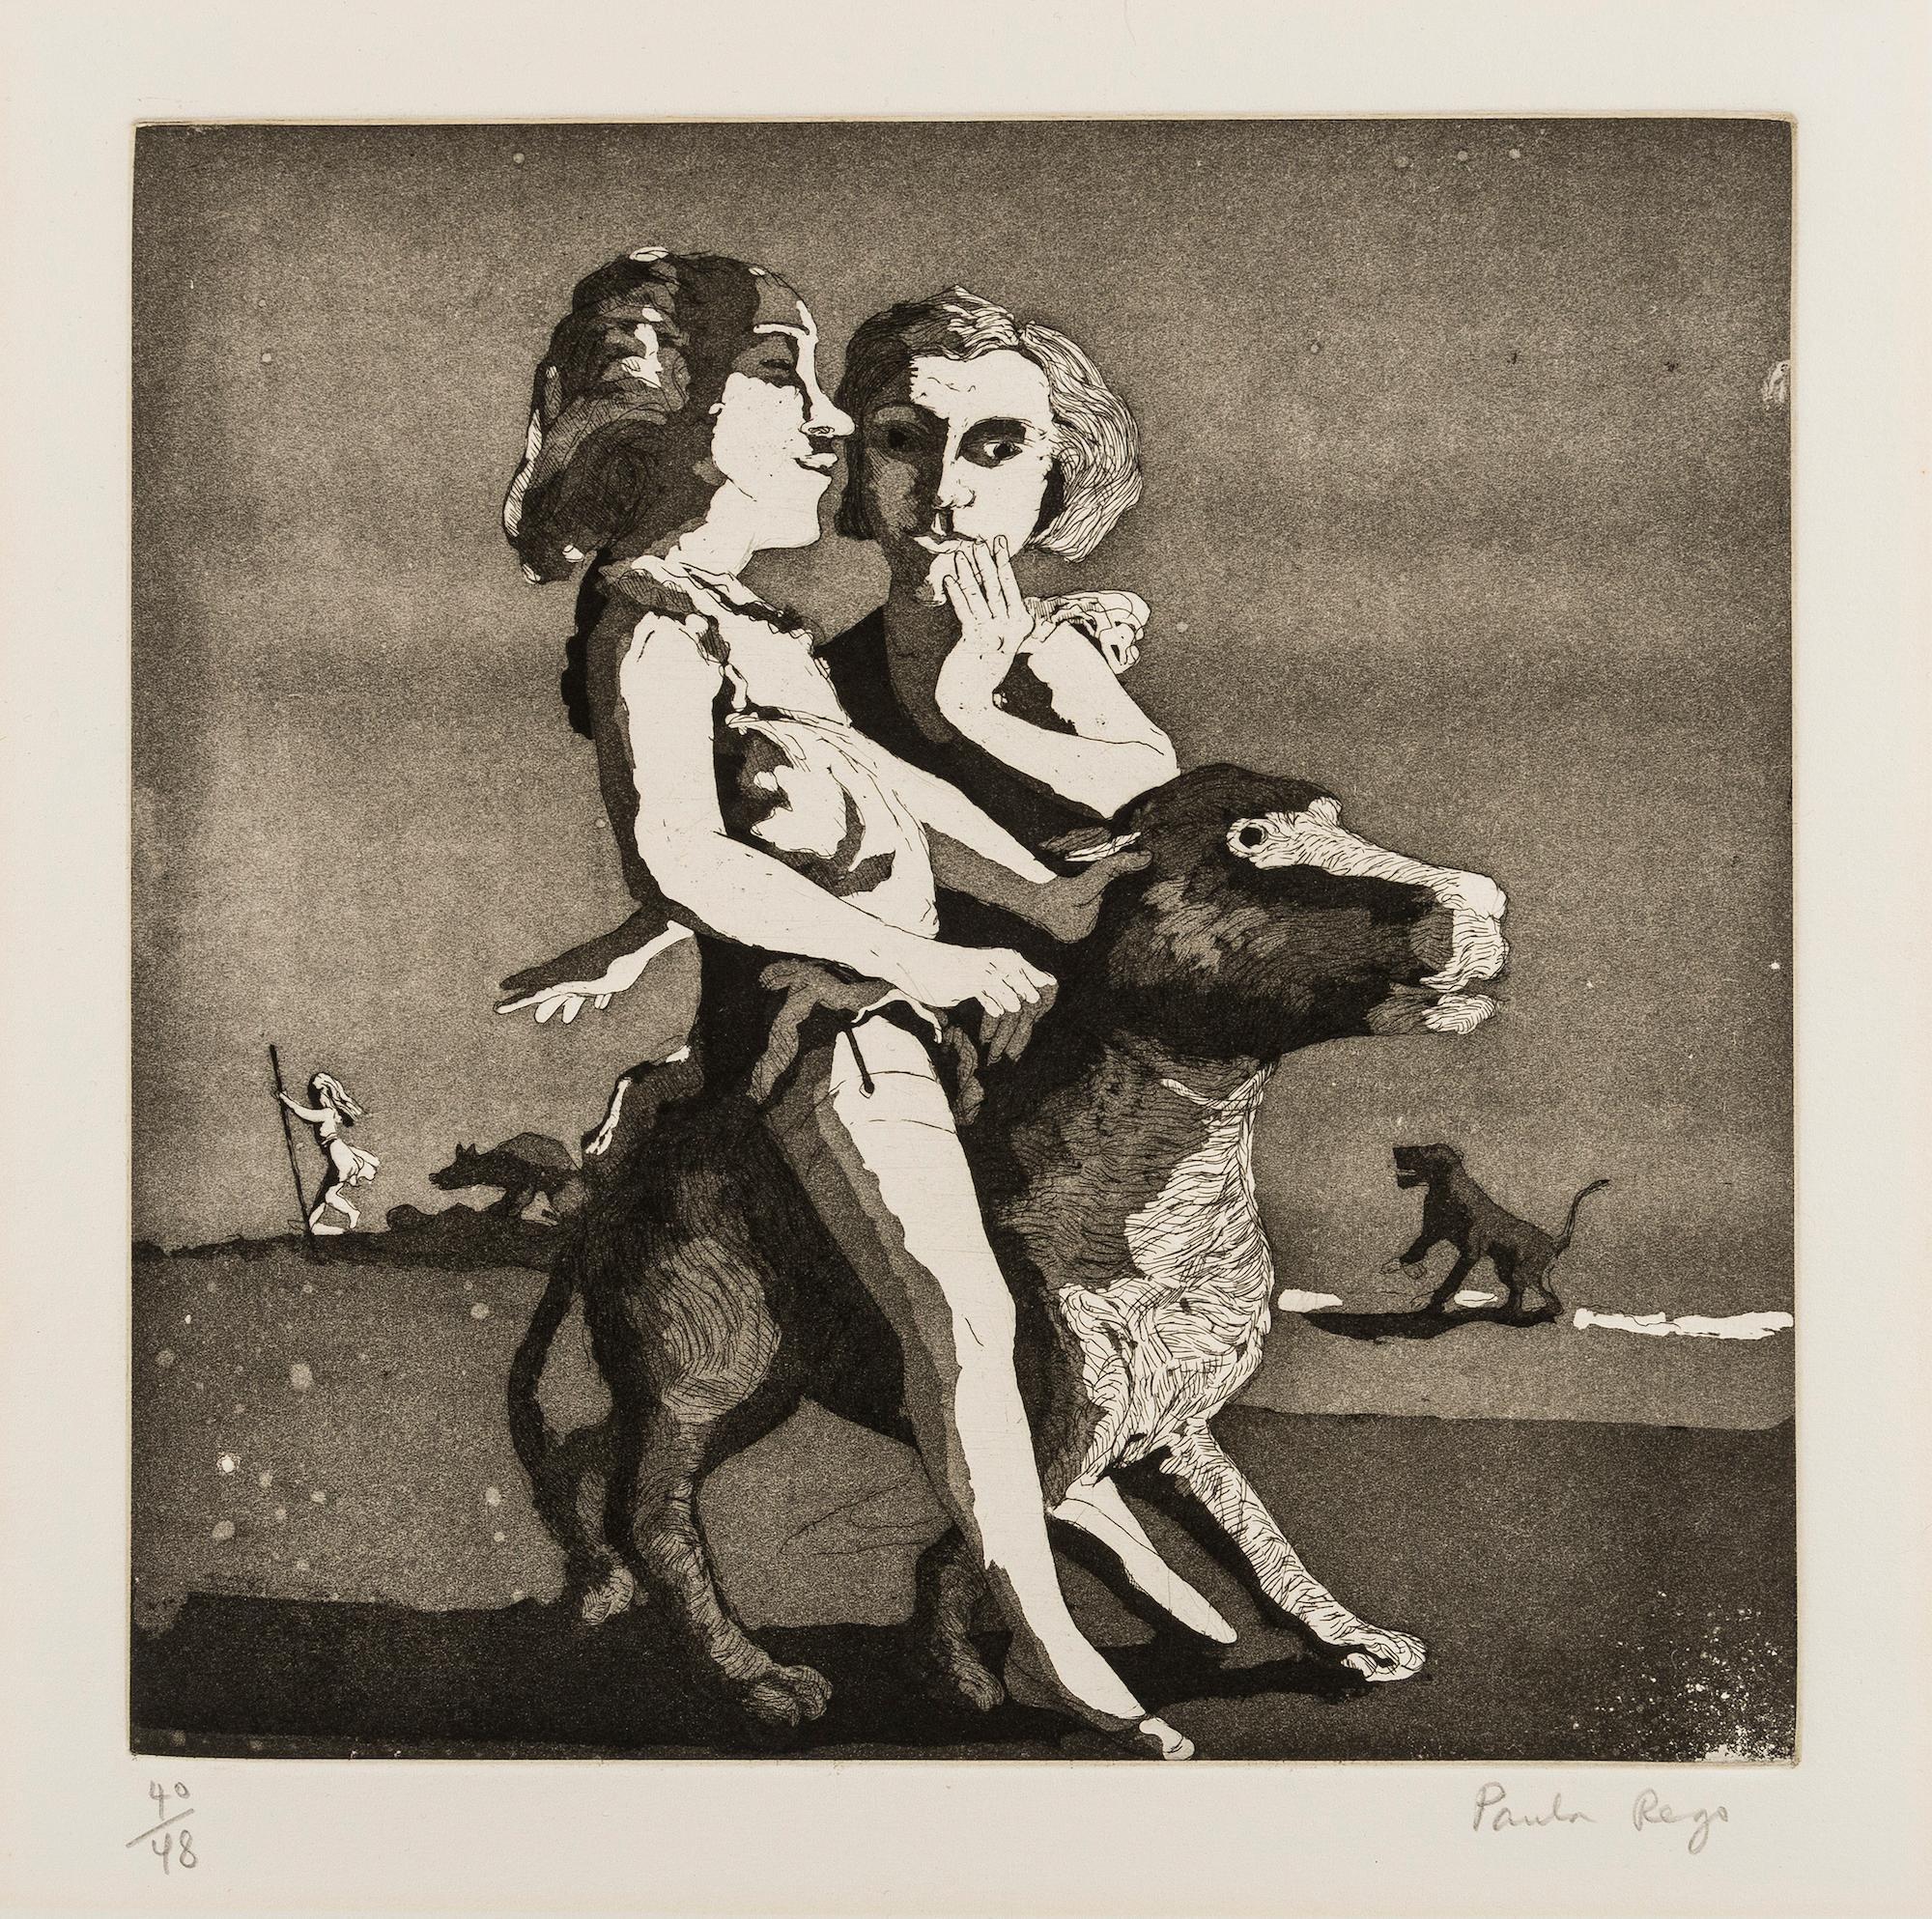 PAULA REGO
Young Predators, 1987

Etching with aquatint, on wove
Signed and numbered from the edition of 50
Printed and published by the Royal College of Art, London
Plate: 24.6 x 25.0 cm (9.7 x 9.8 in)
Sheet: 30.5 x 30.4 cm (12.0 x 12.0